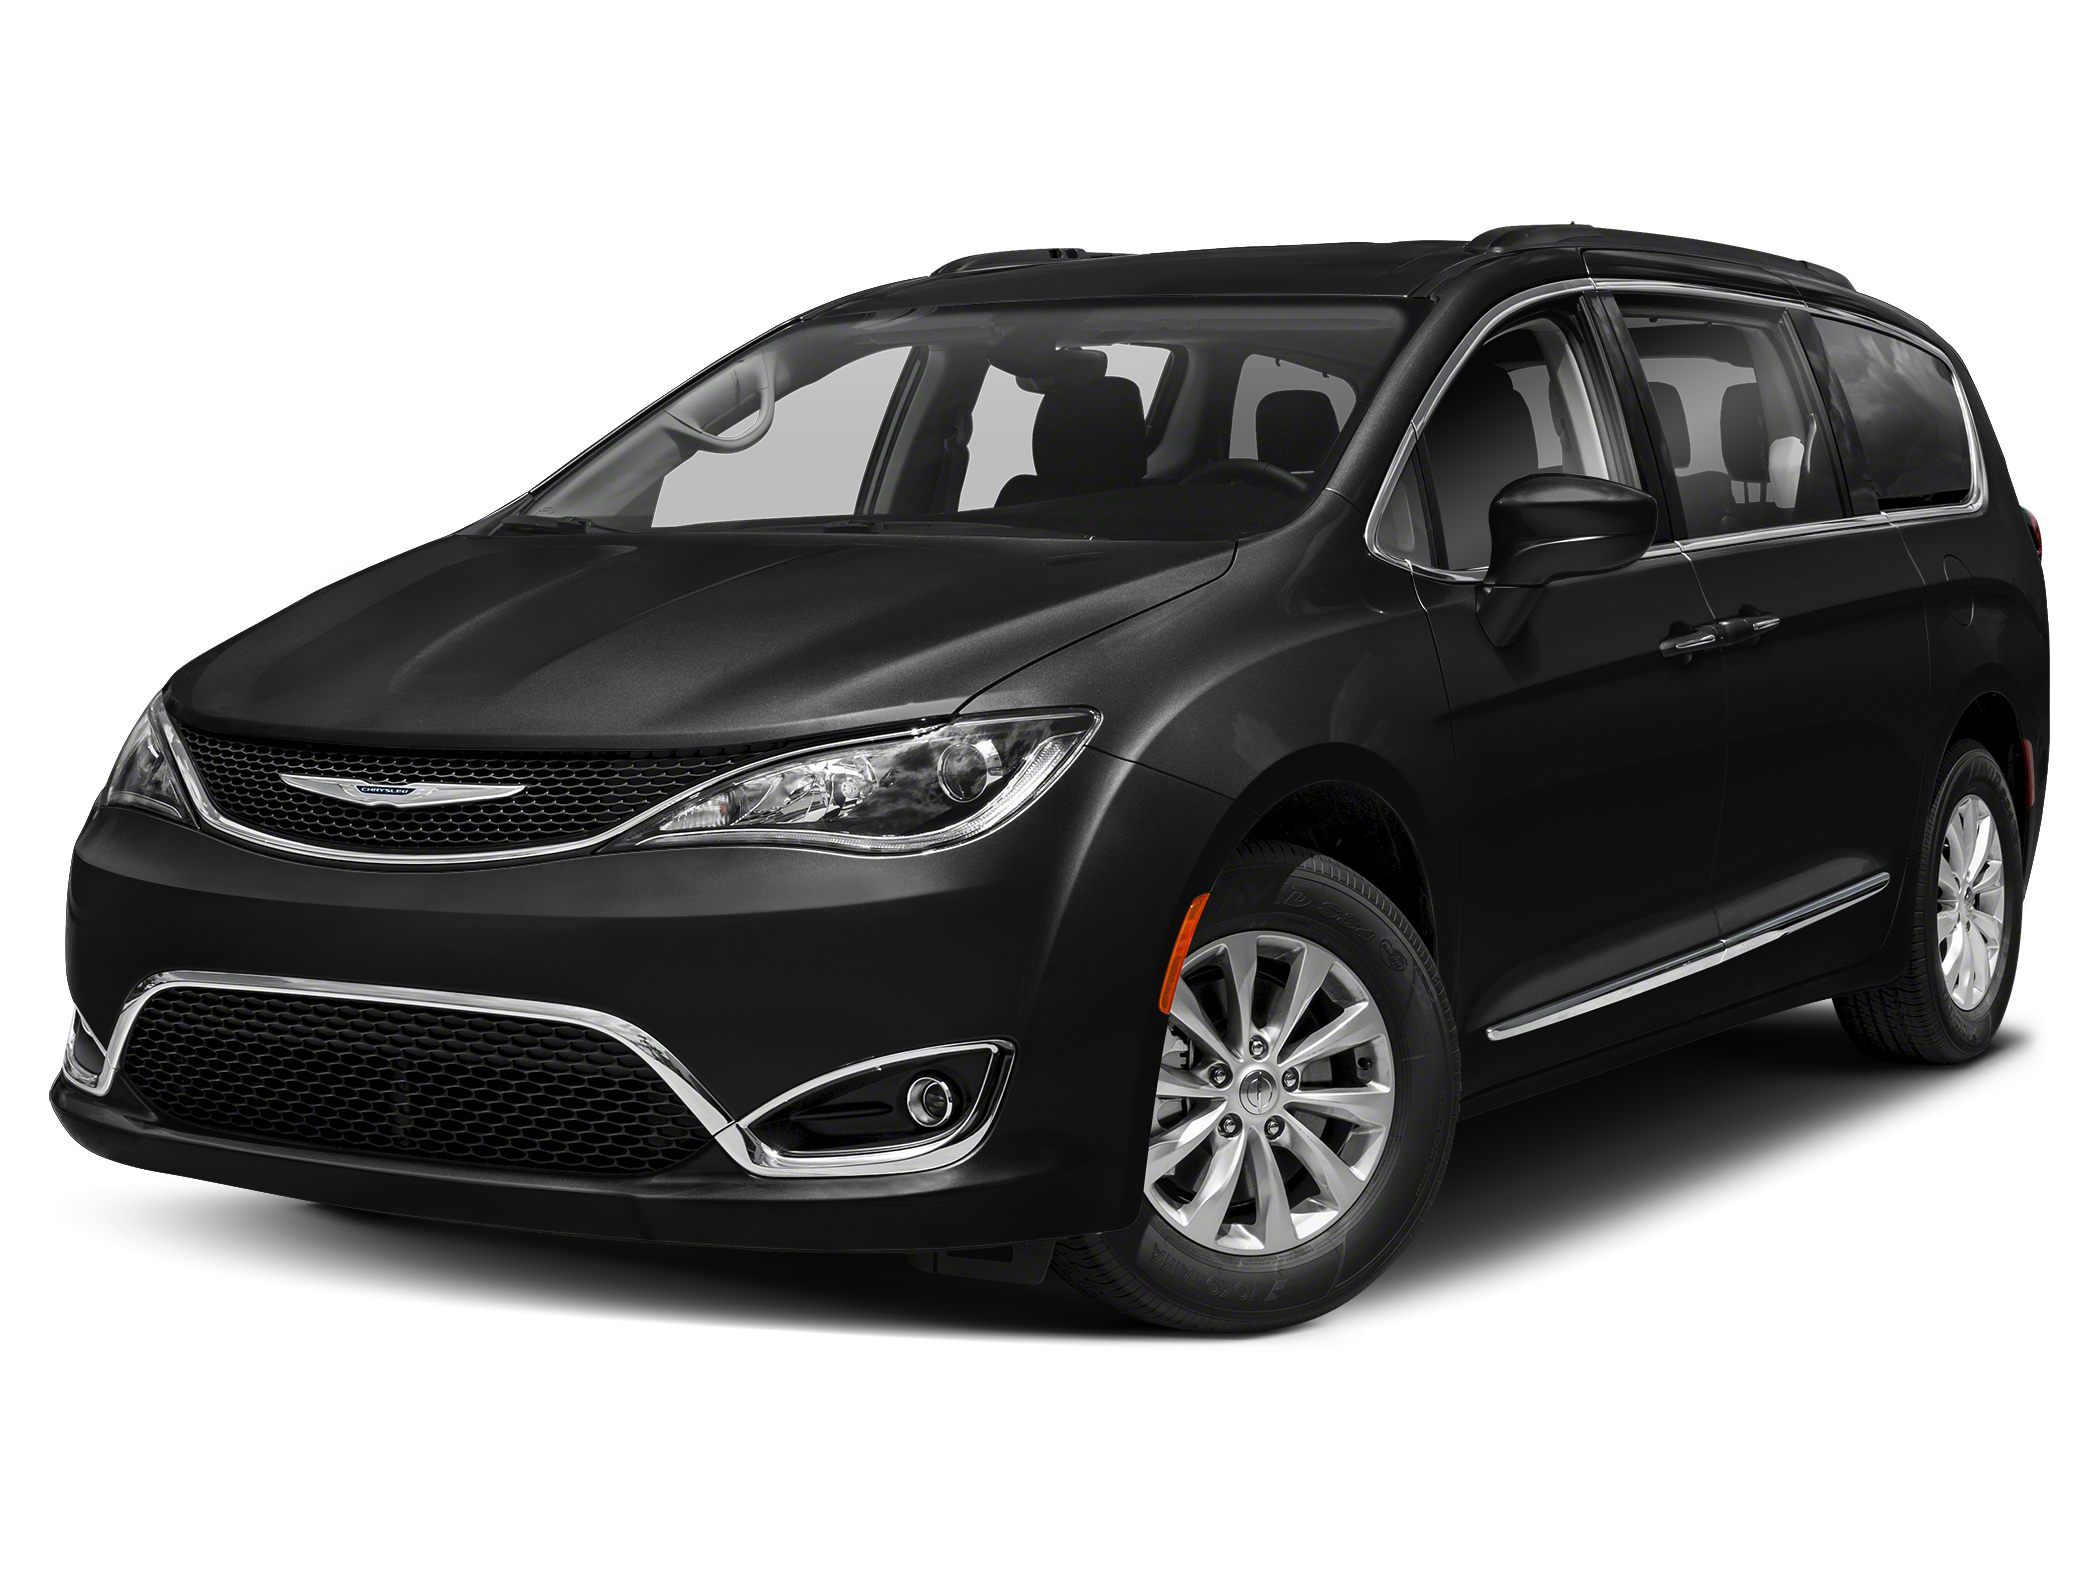 Used Chrysler Pacifica Freehold Township Nj